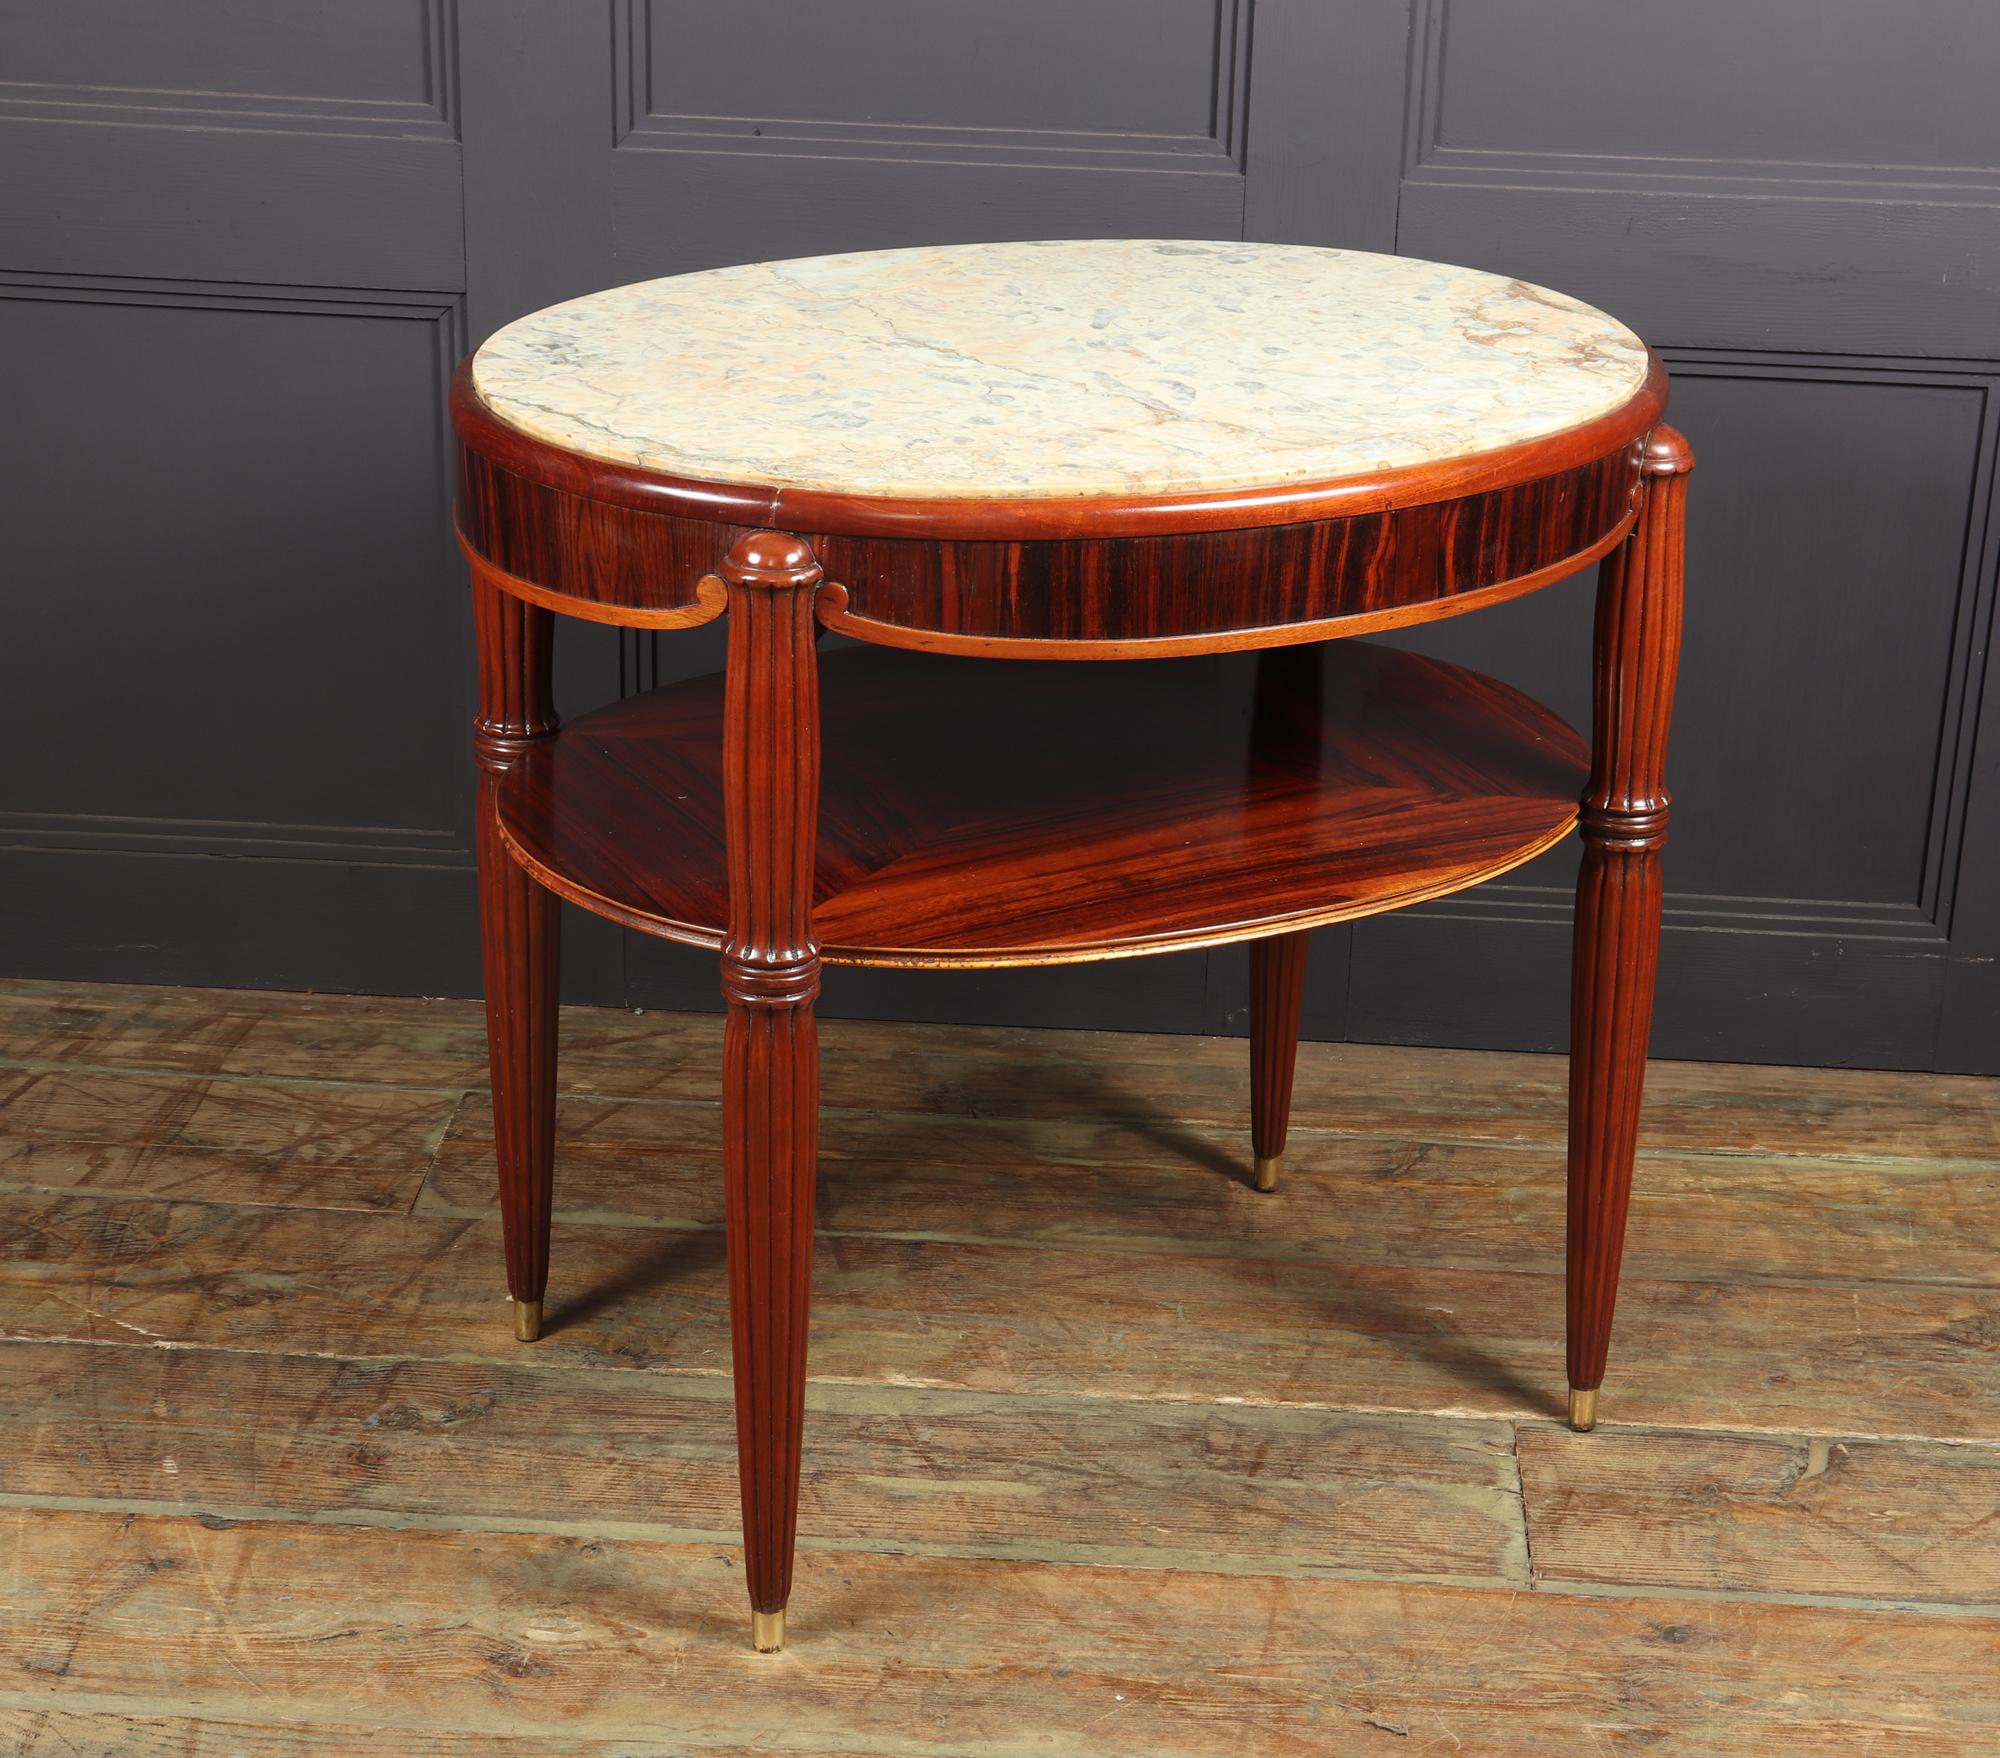 Mid-20th Century French Art Deco Occasional Table with Marble Top